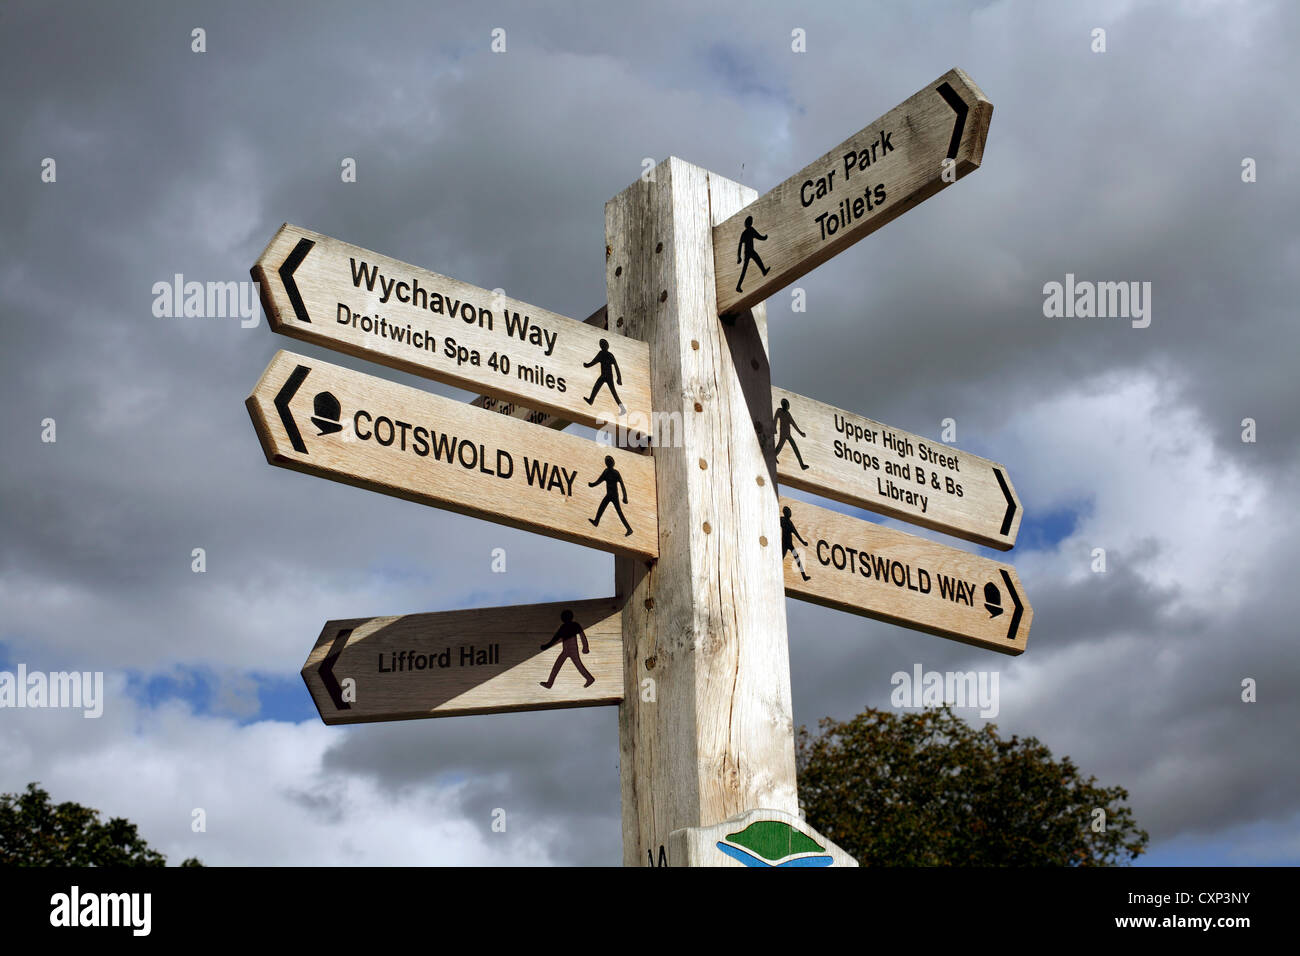 Signpost for the Wychavon Way and the Cotswold Way, in Broadway, Gloucestershire. Stock Photo